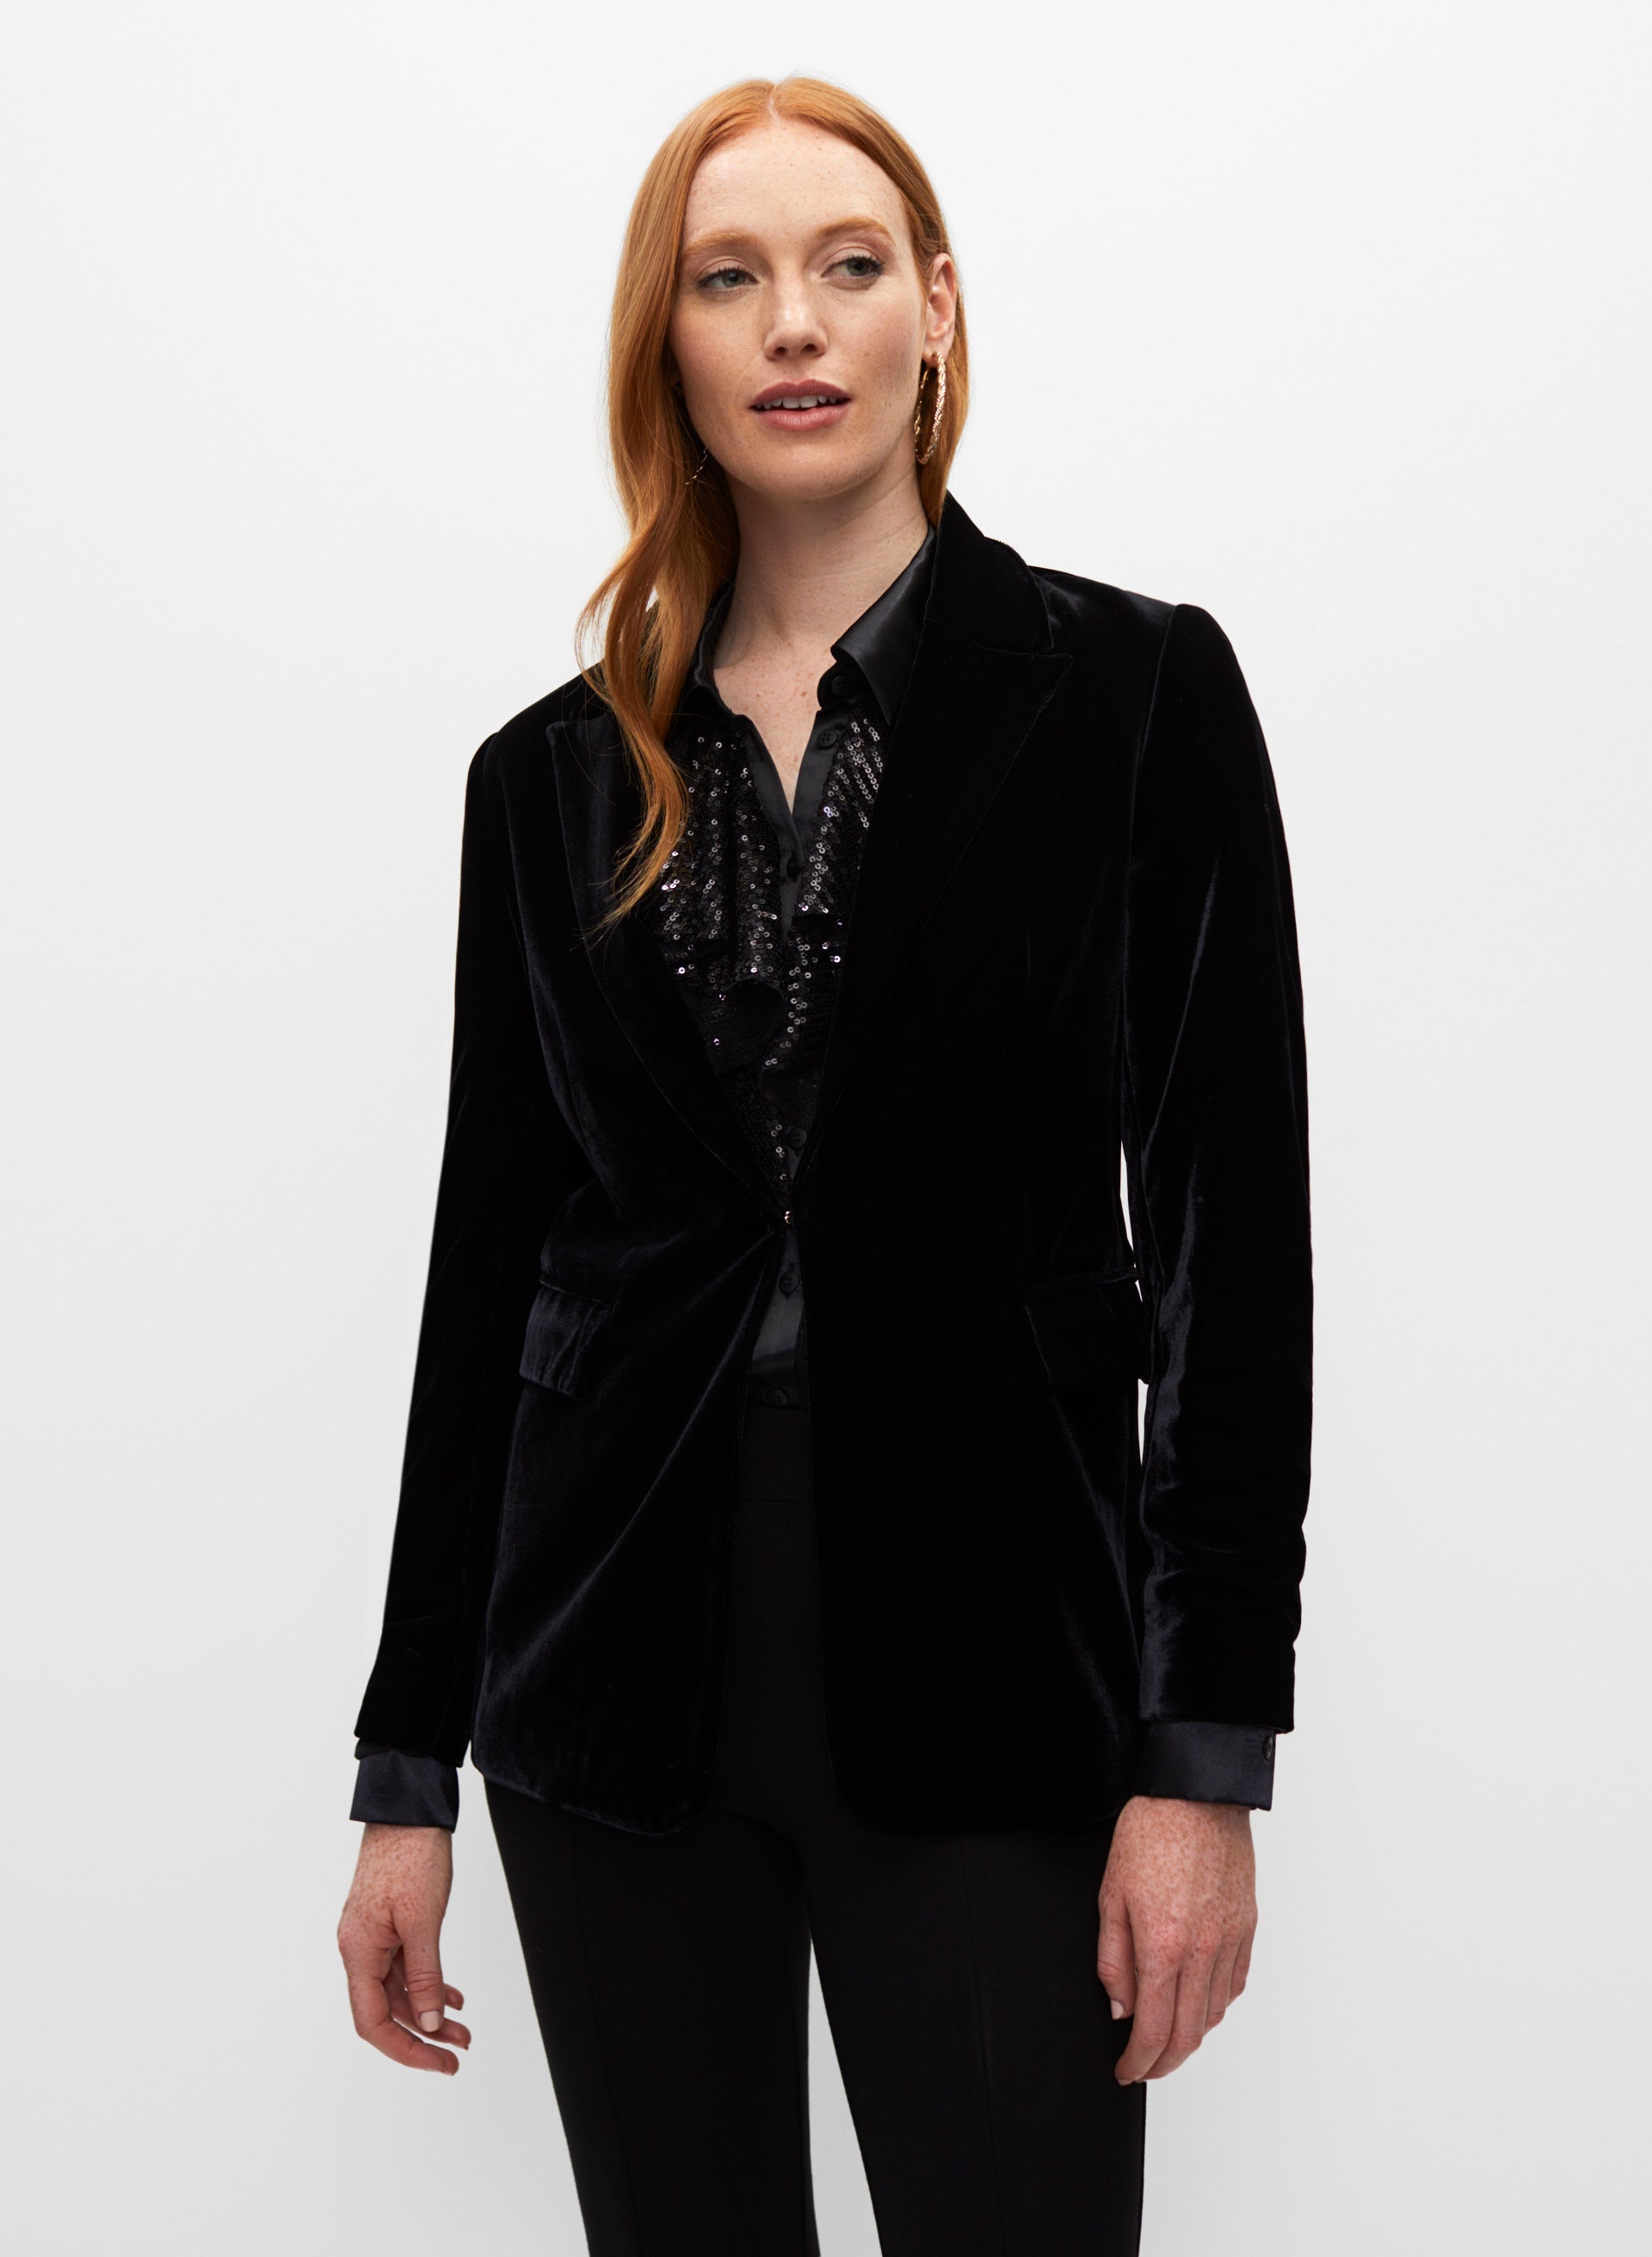 This Velvet Jacket Is Basically Foreplay